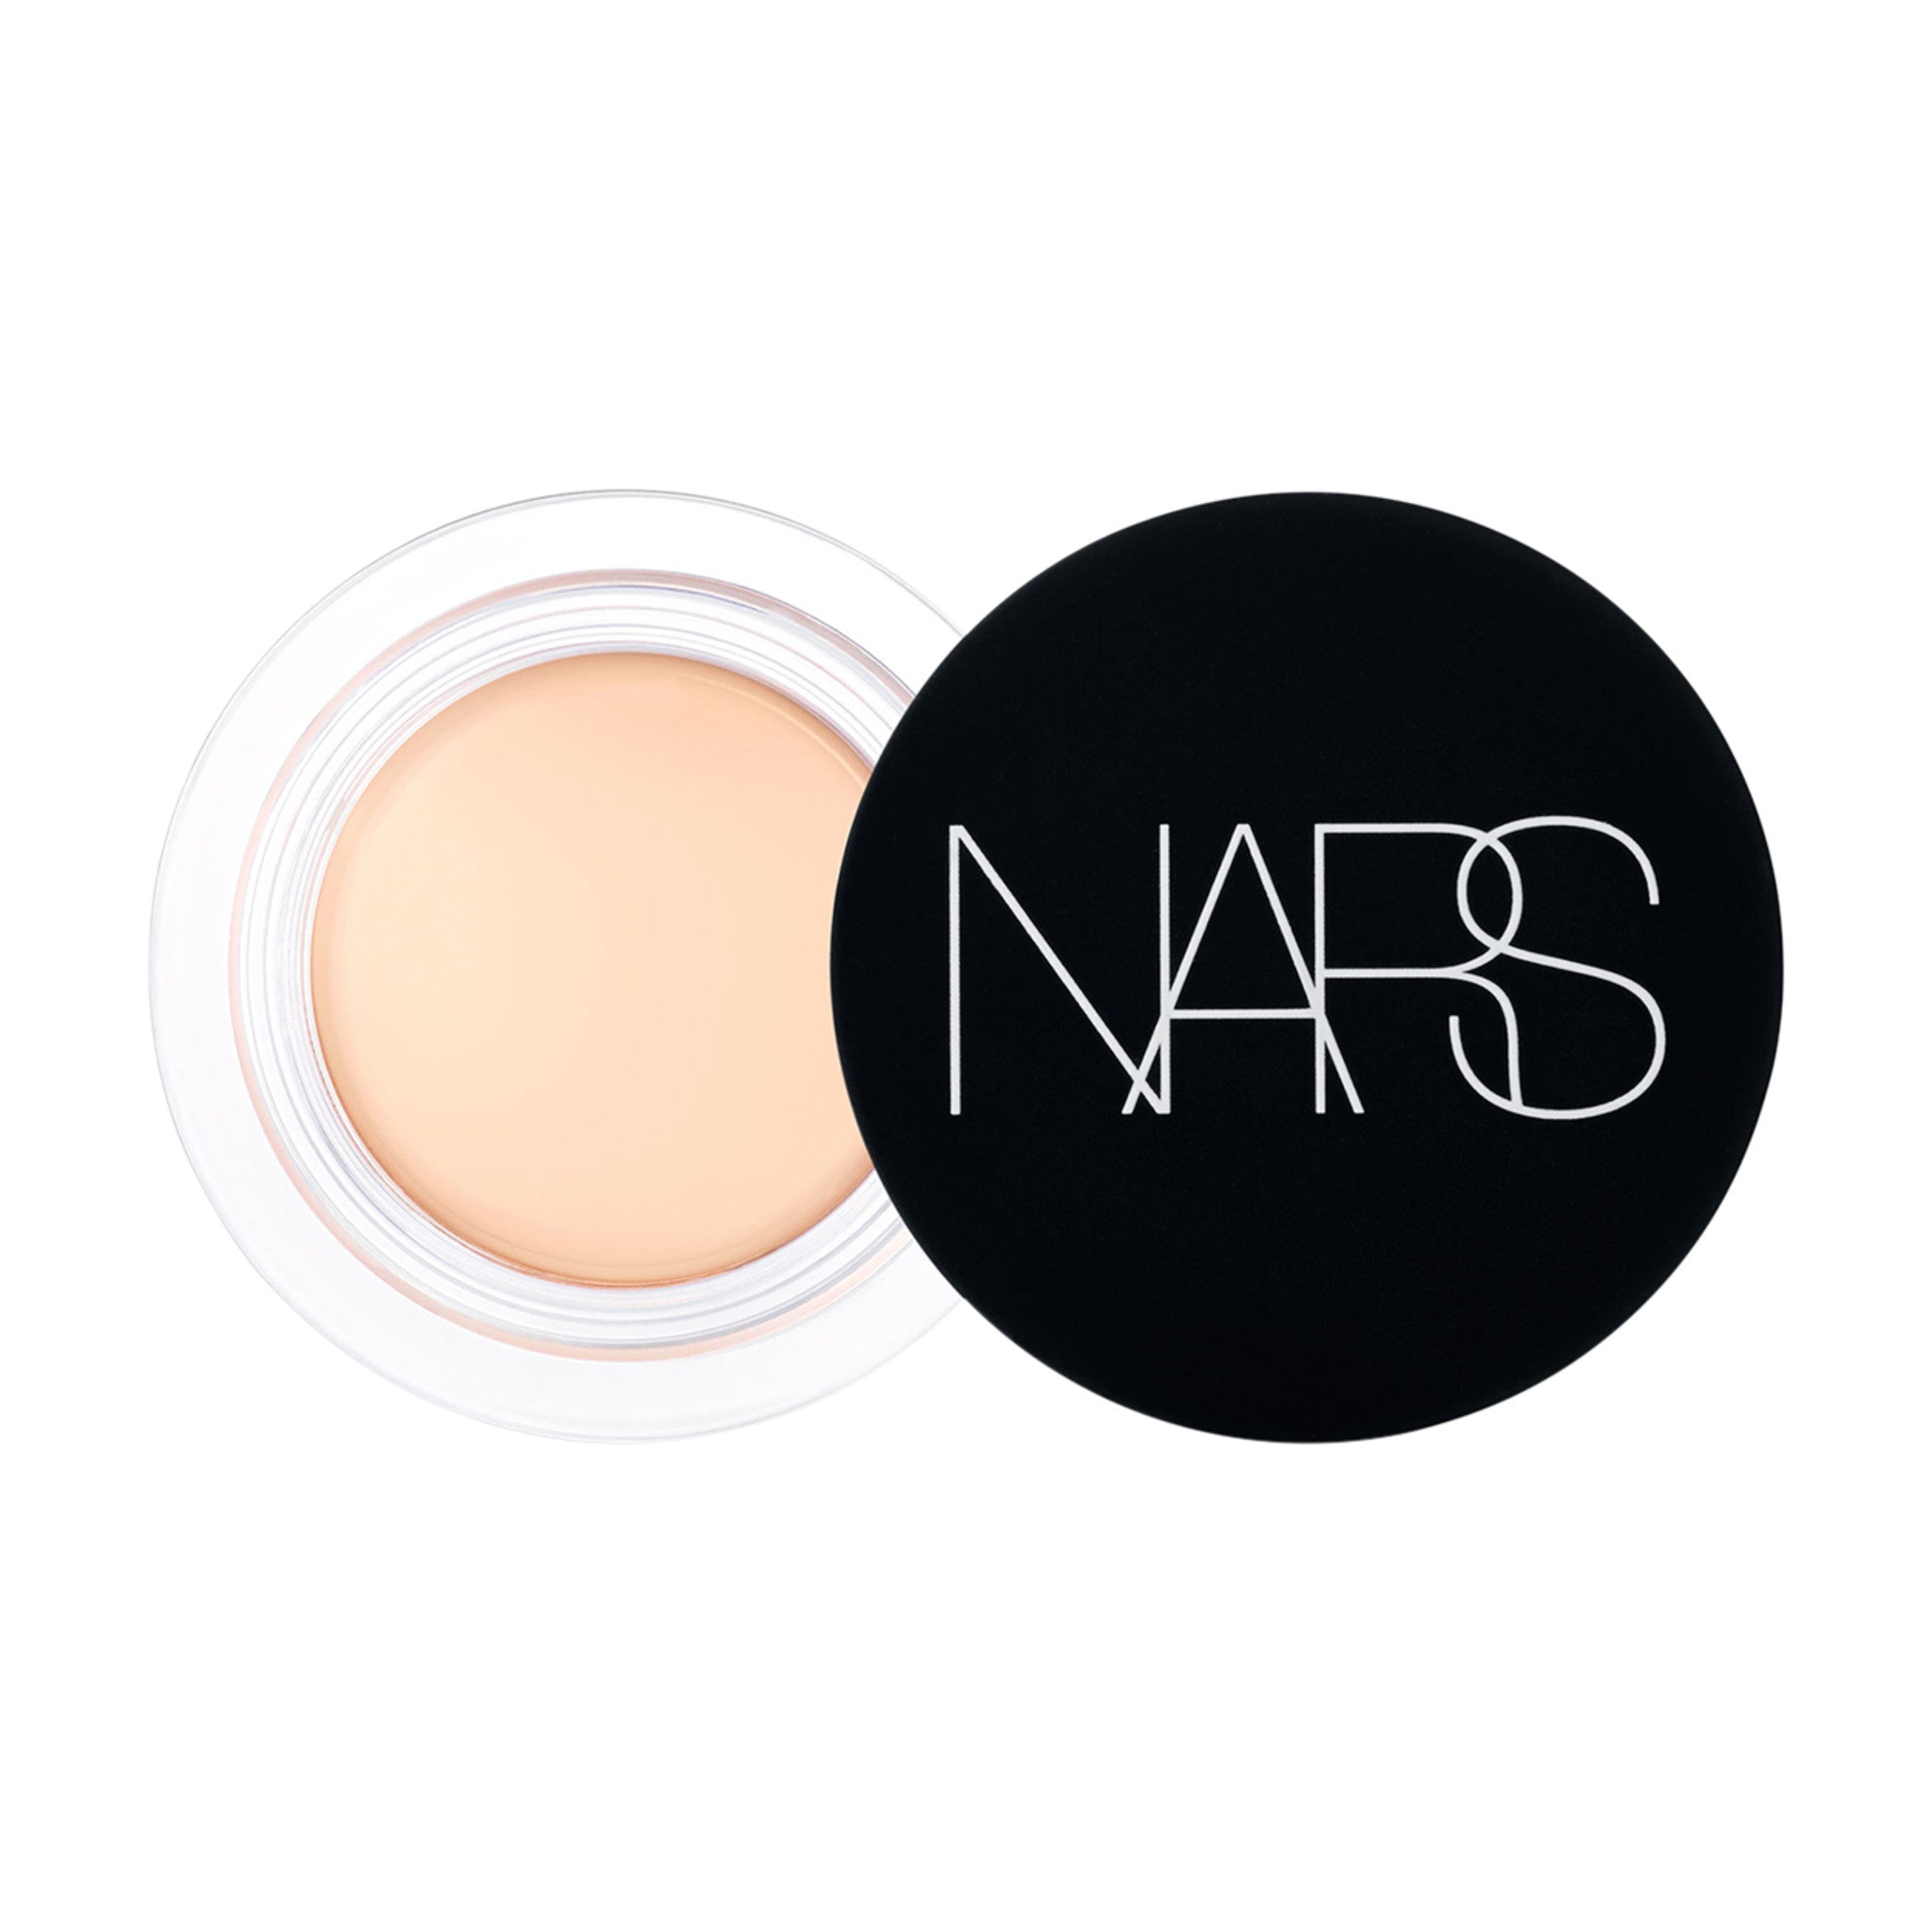 Nars Soft Matte Complete Concealer Color/Shade variant: Chantilly main image. This product is for light neutral complexions